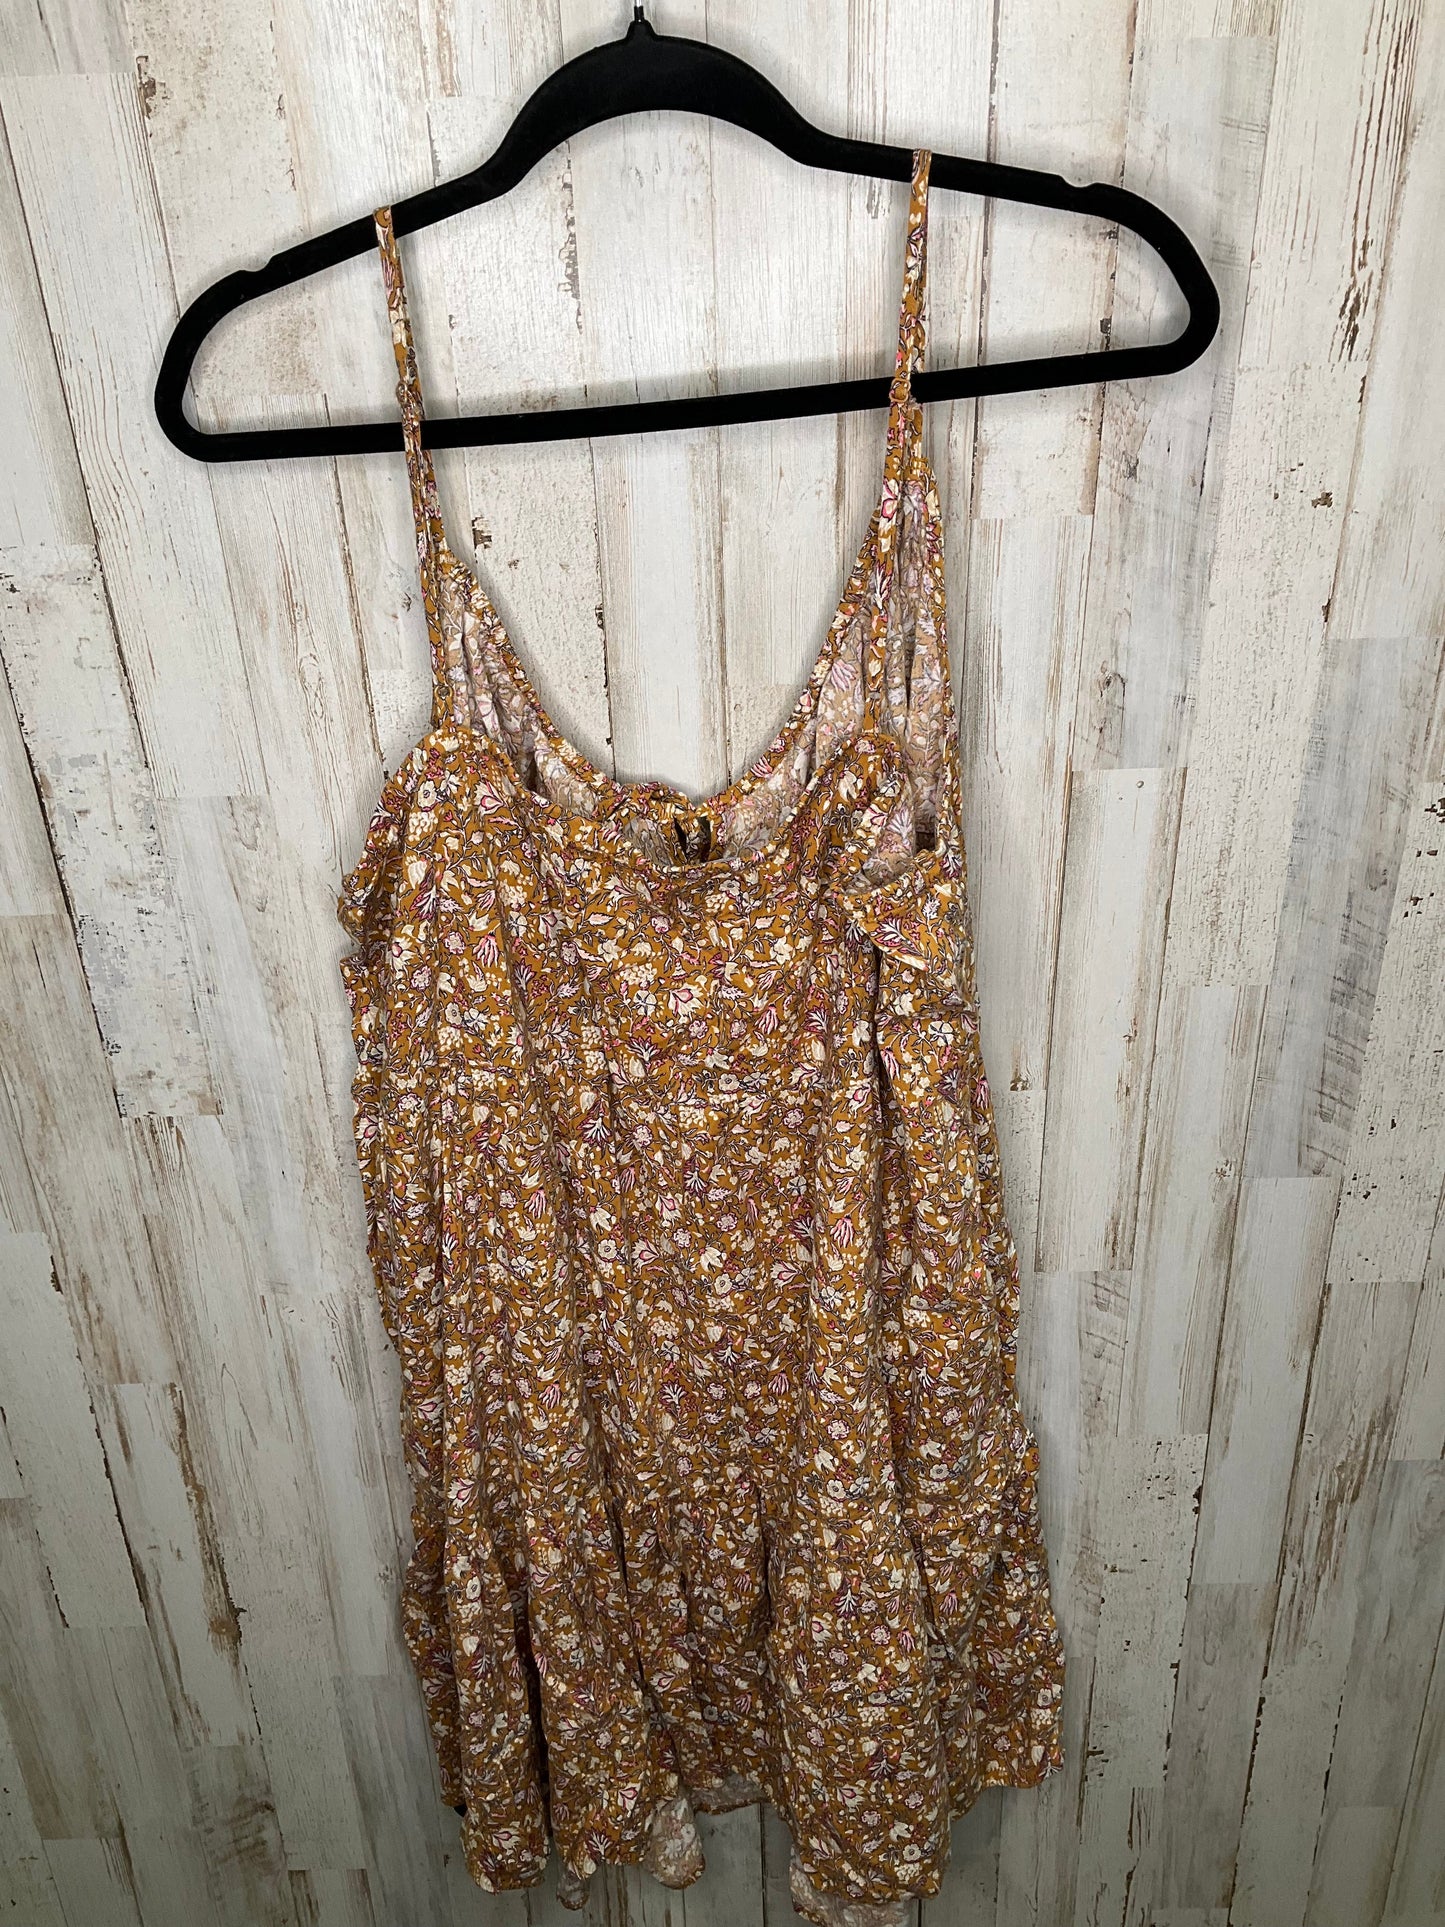 Top Sleeveless By Old Navy  Size: 2x